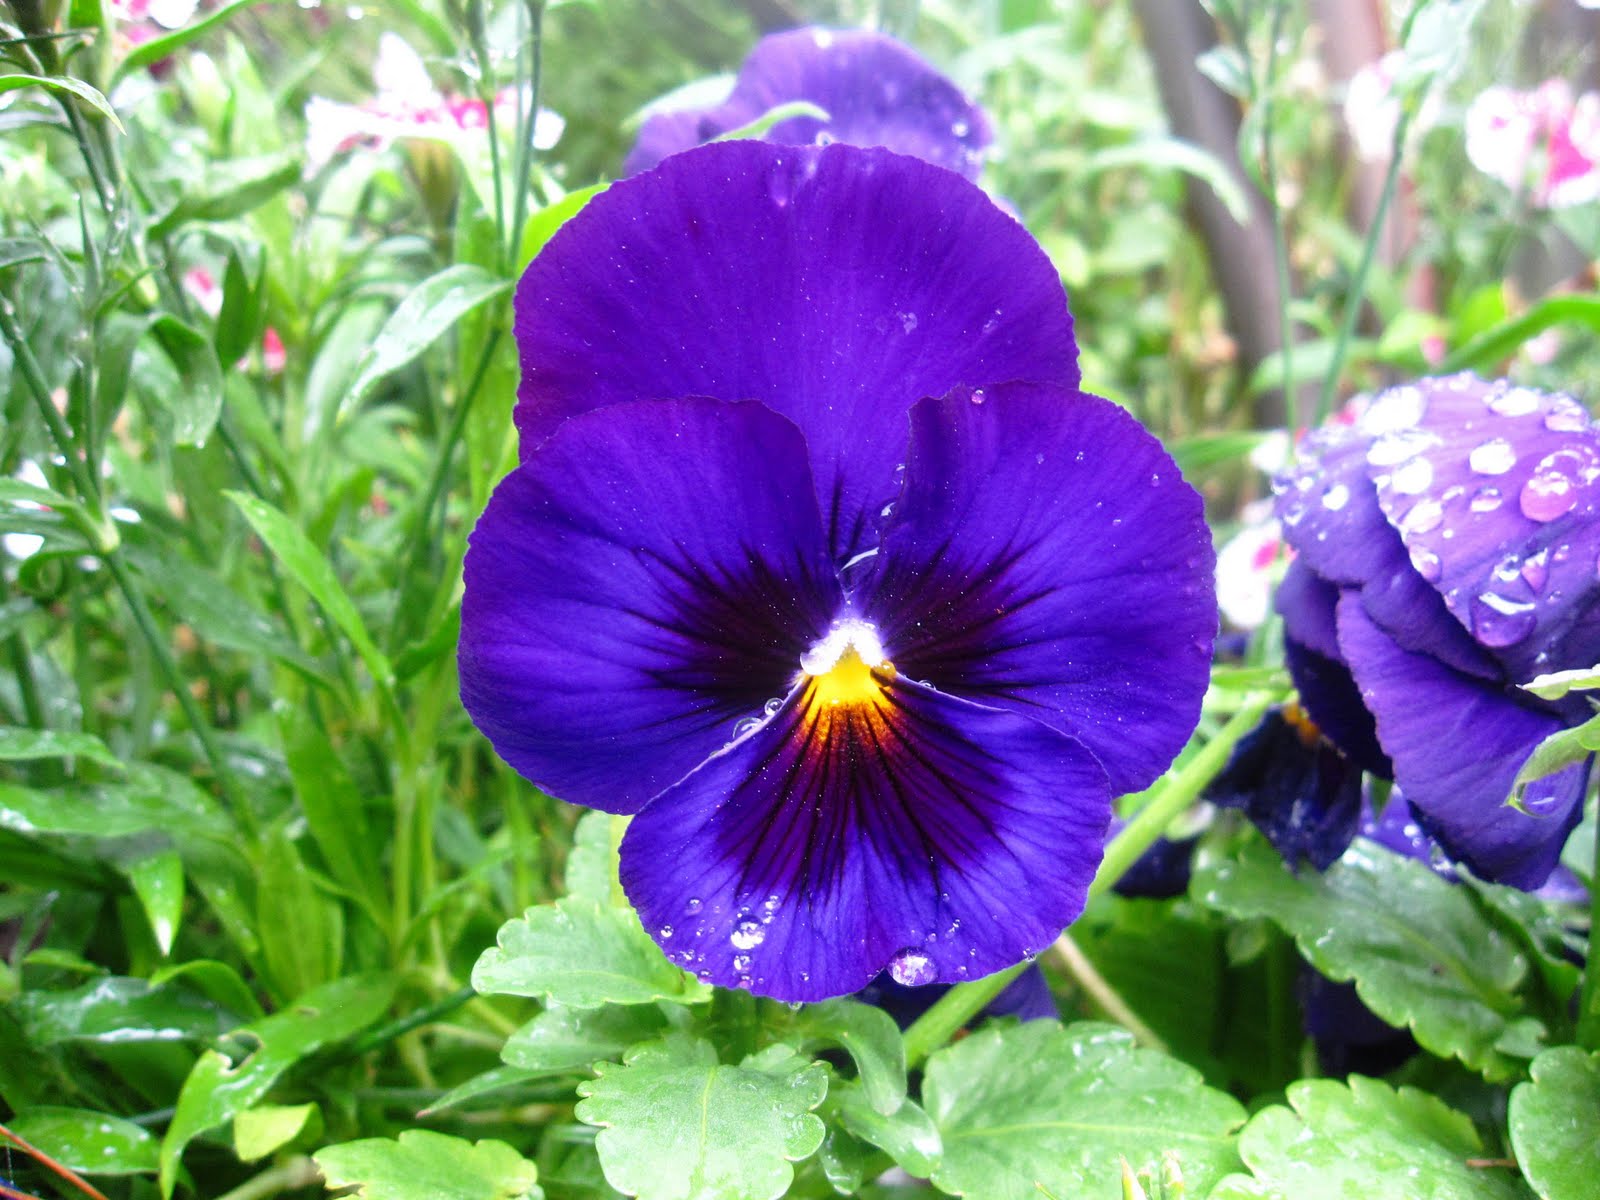 ... pansy from my garden on easter here are some flowers from my garden